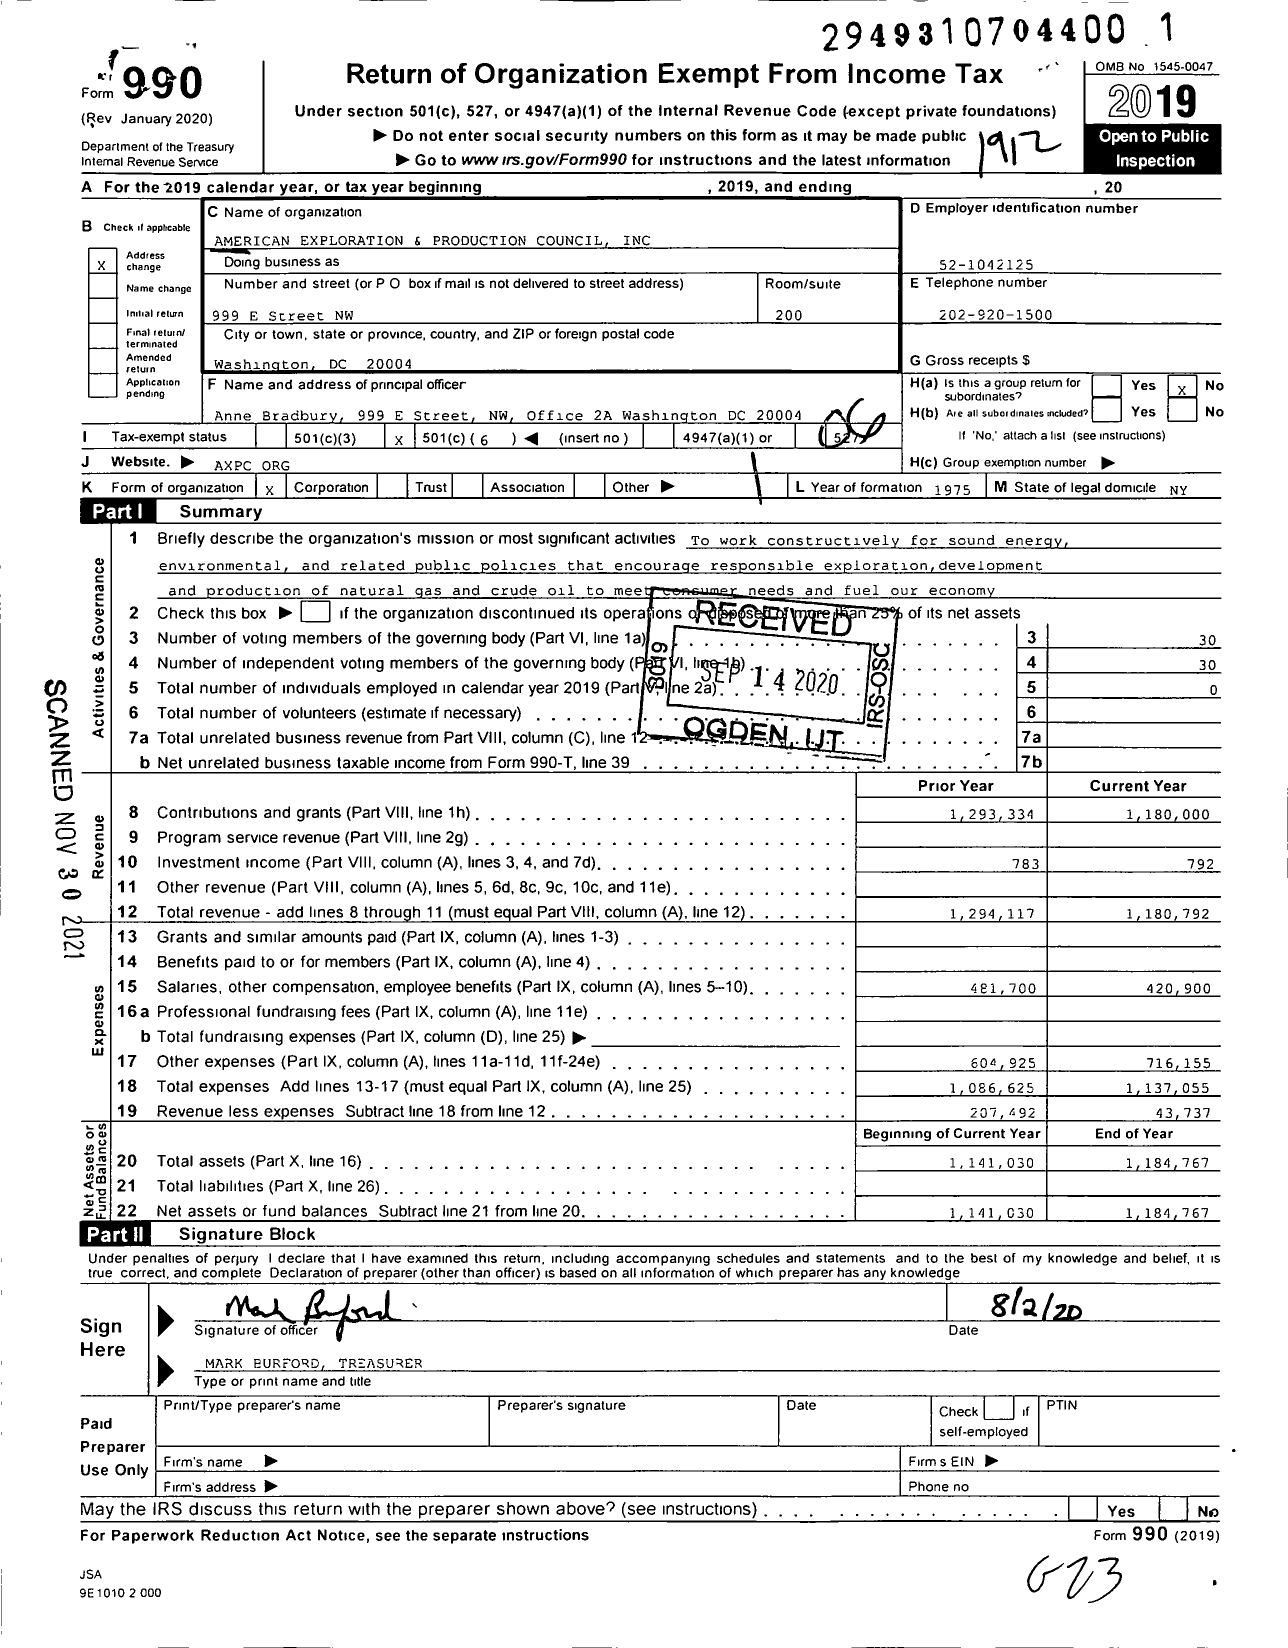 Image of first page of 2019 Form 990O for American Exploration and Production Council (AXPC)